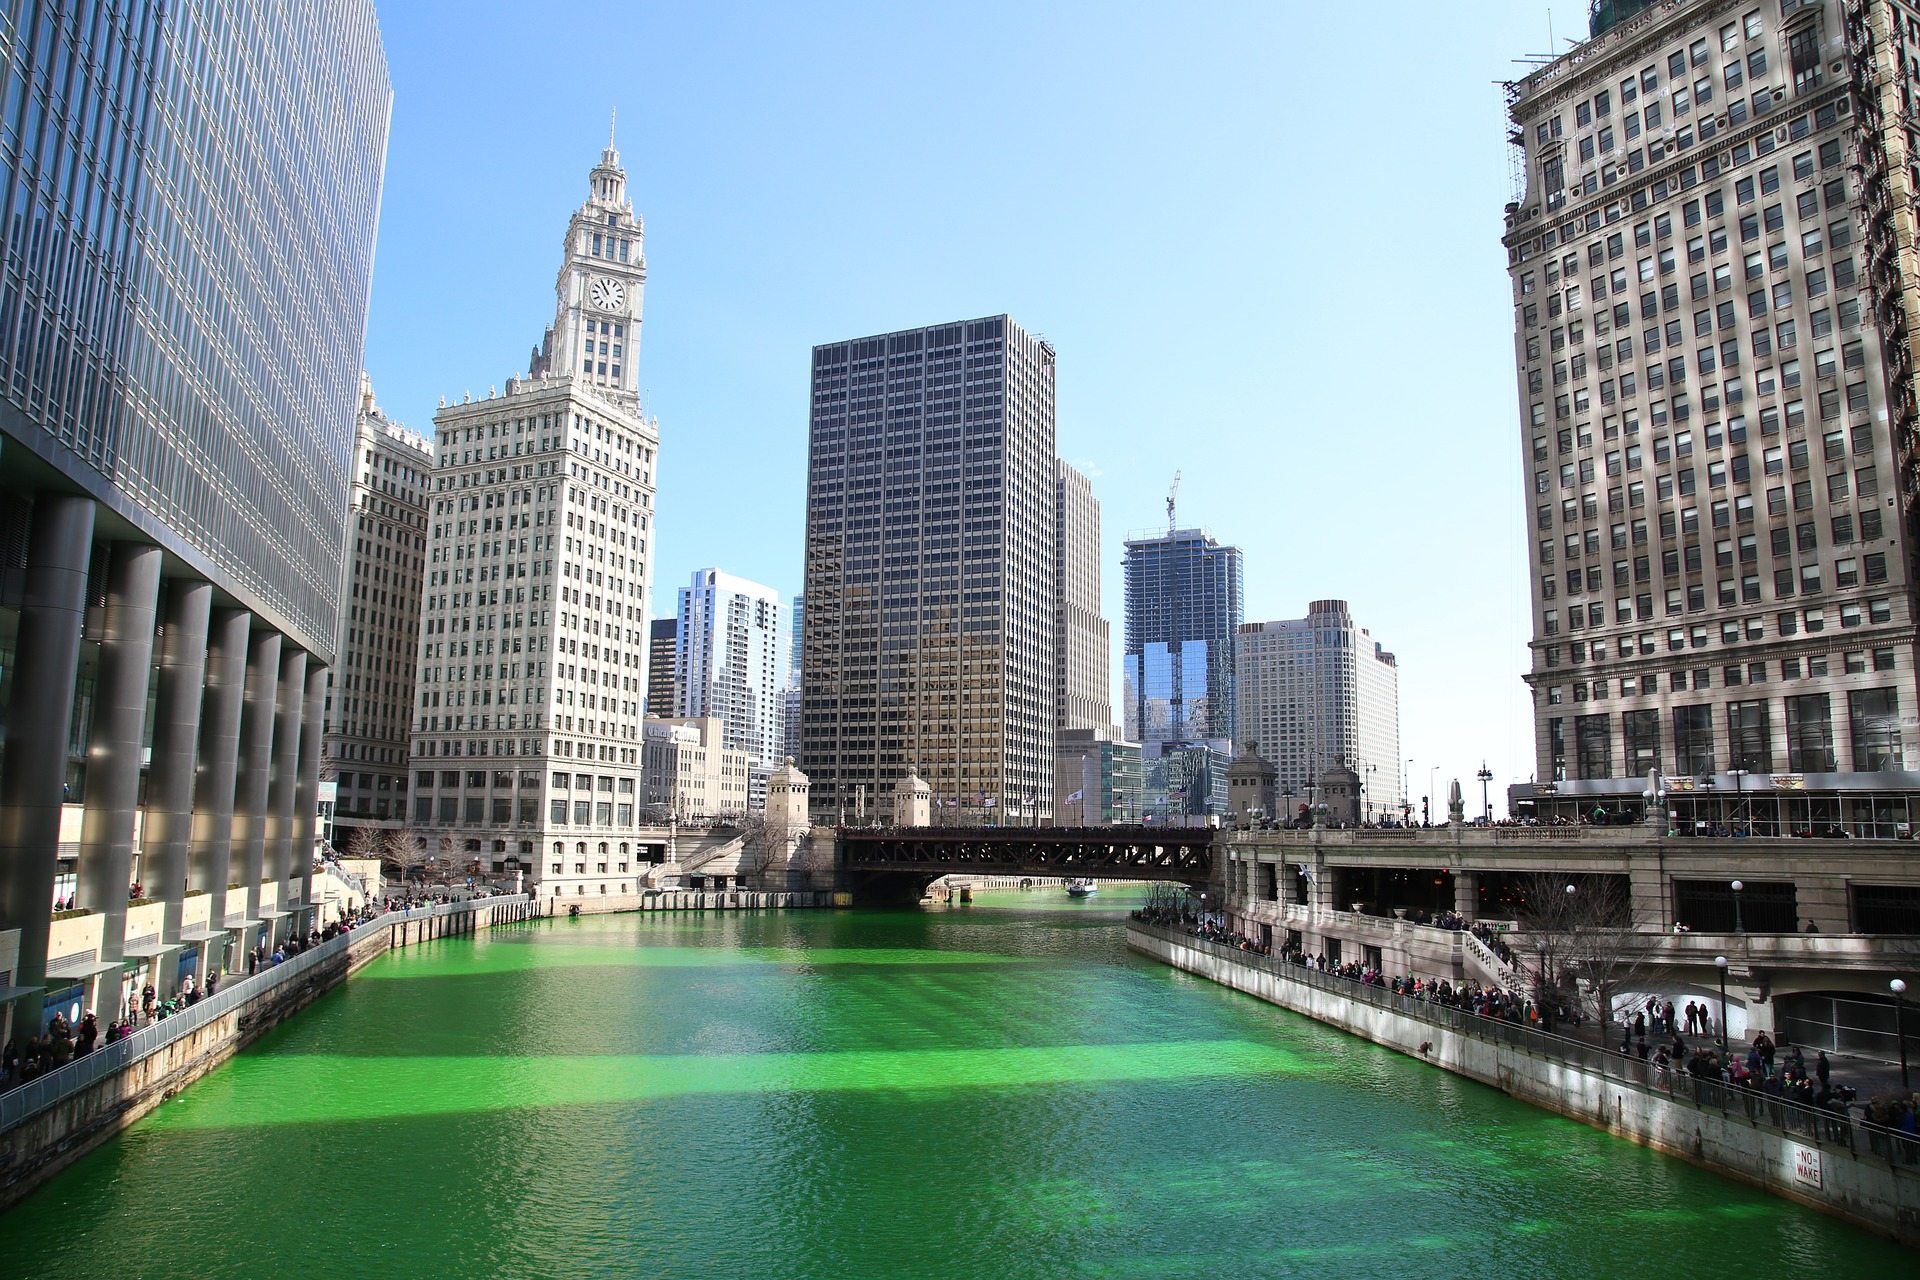 St. Patrick's Day in Chicago